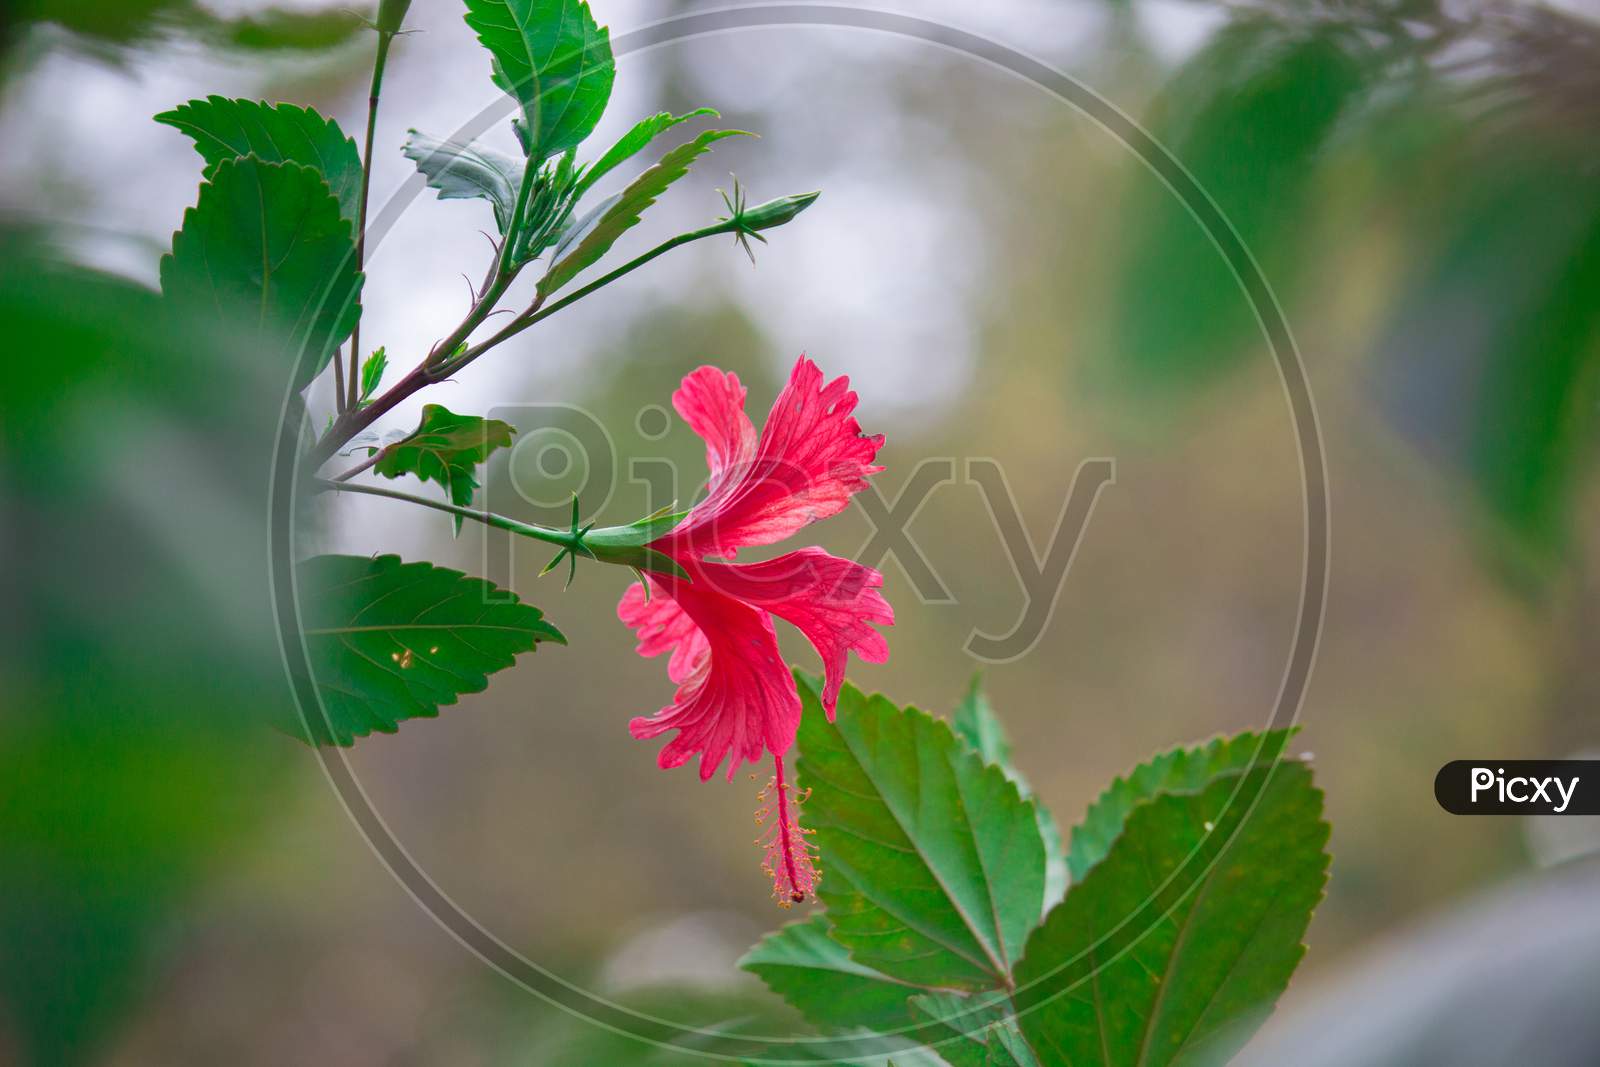 Hibiscus flower blooming away on a pleasant day